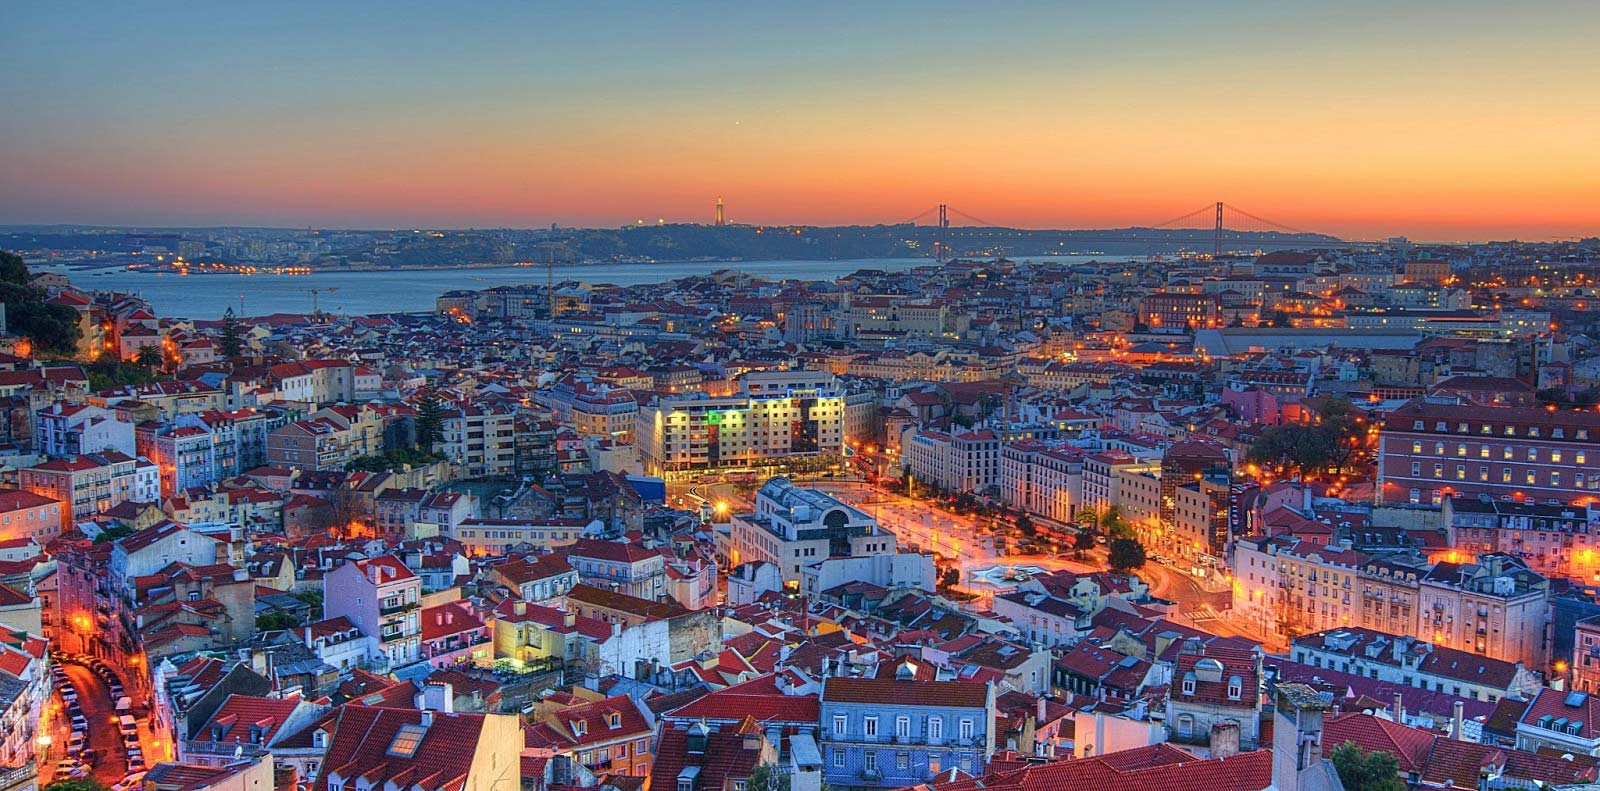 9 reasons why Lisbon should be your next cruise destination